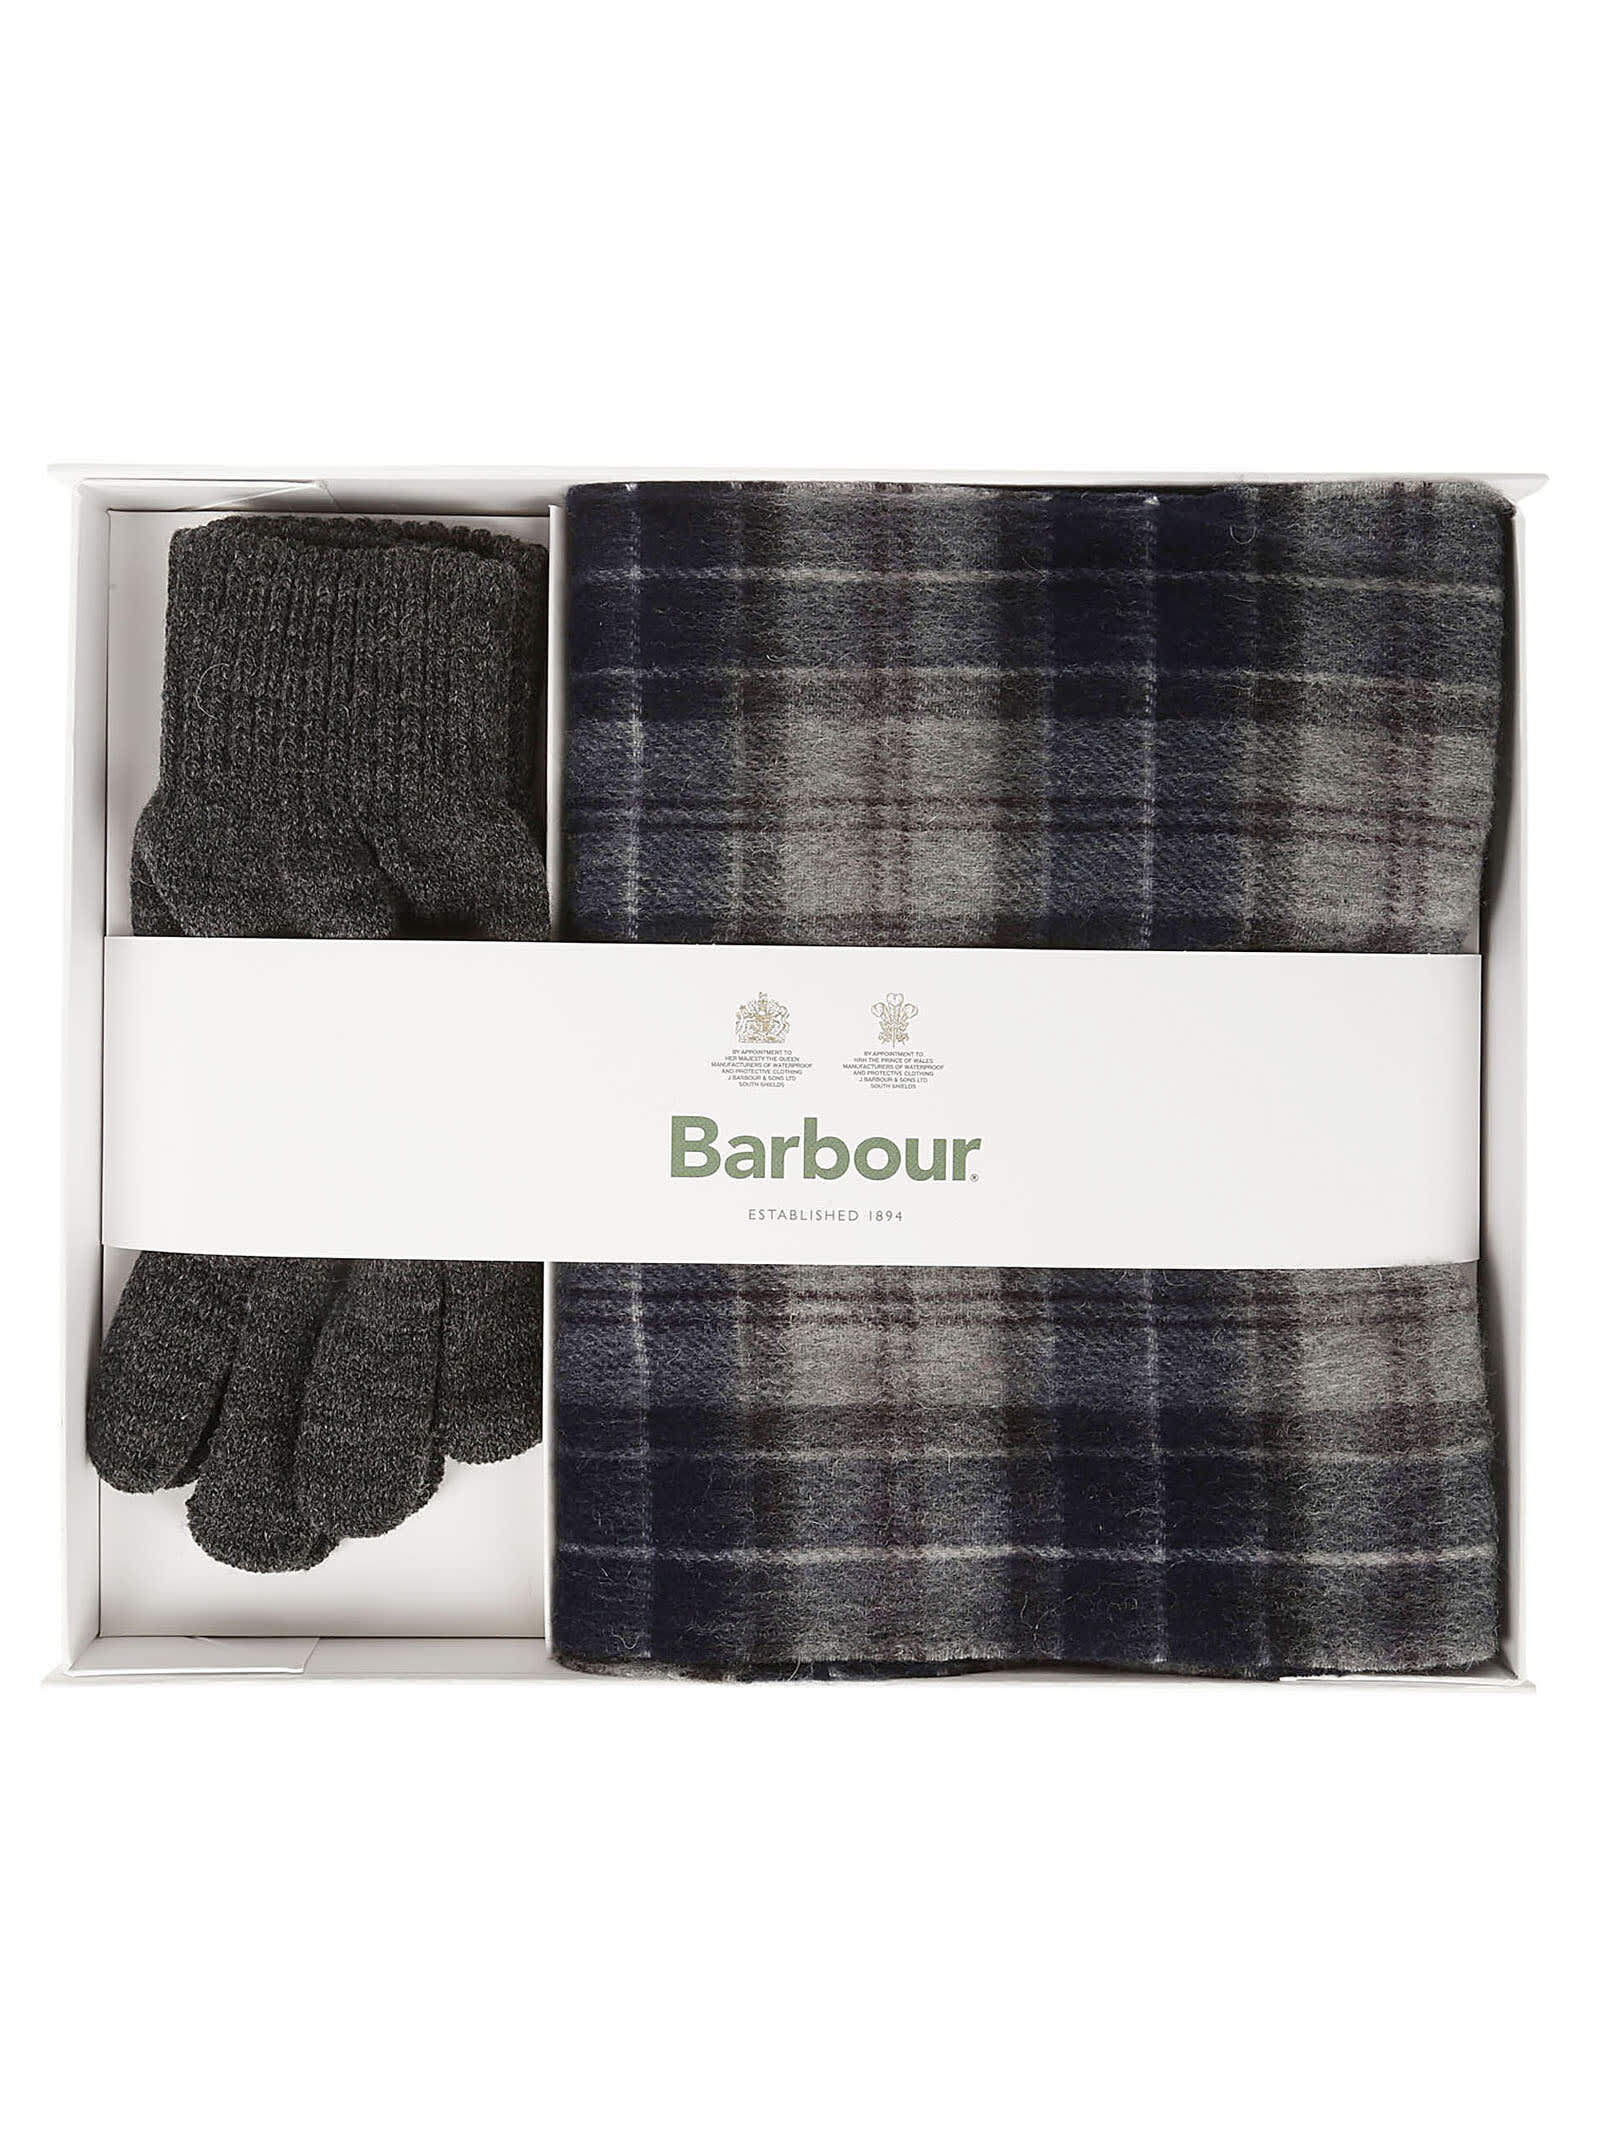 BARBOUR SCARF AND GLOVES GIFT SET